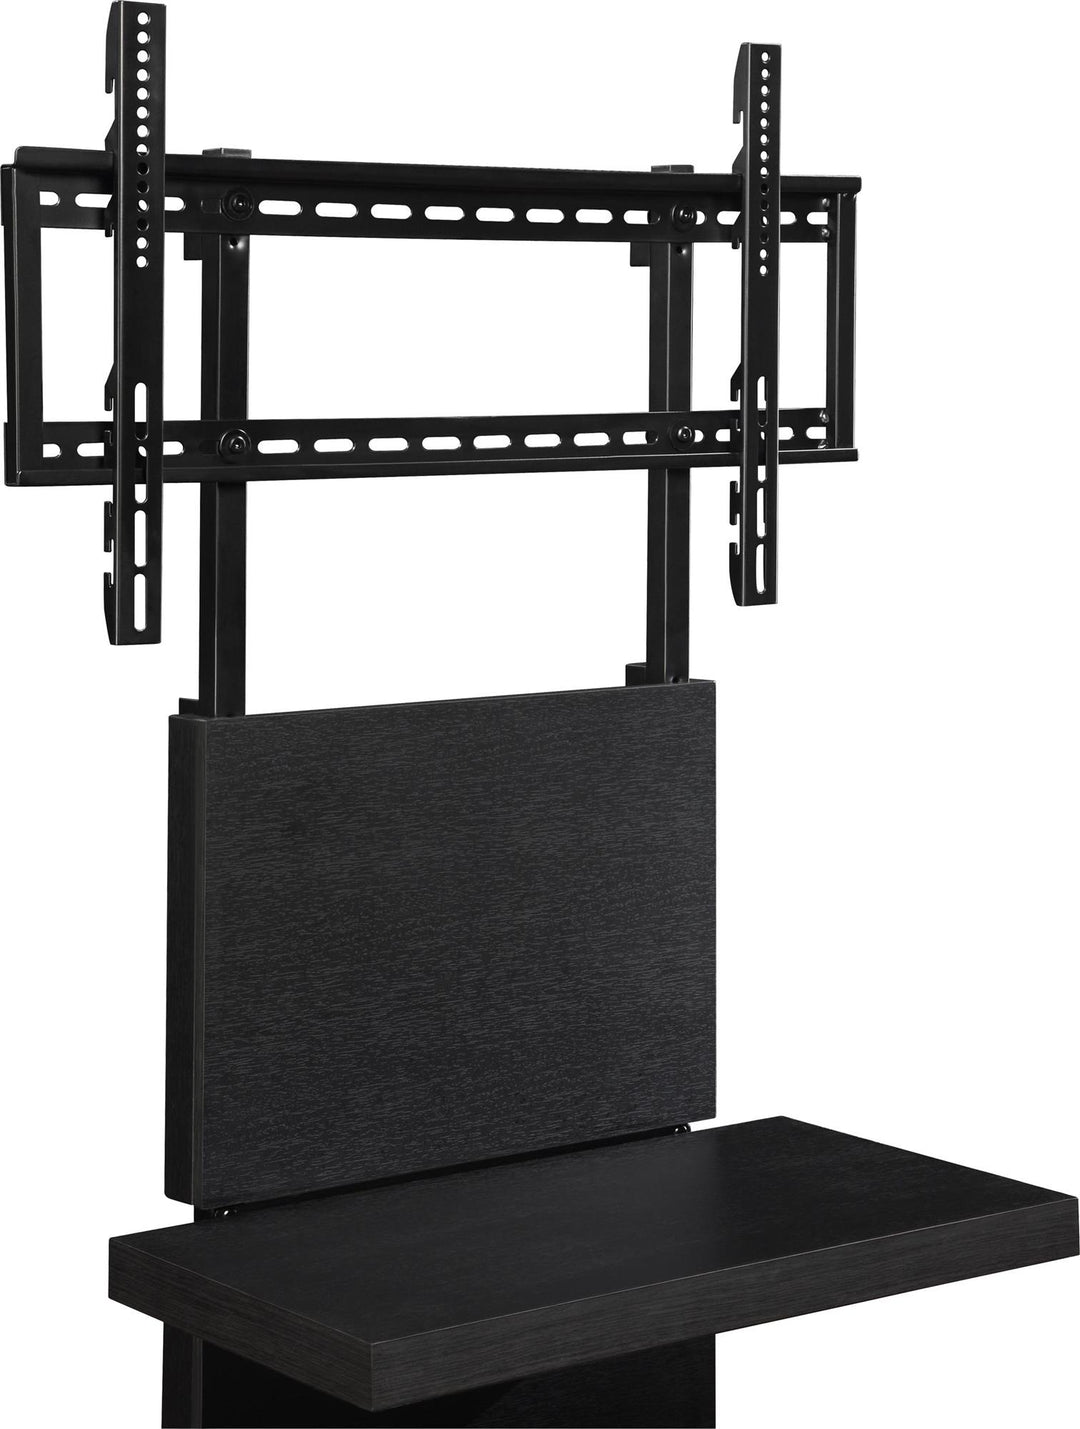 Wall-mounted TV stand for 60" screens -  Black